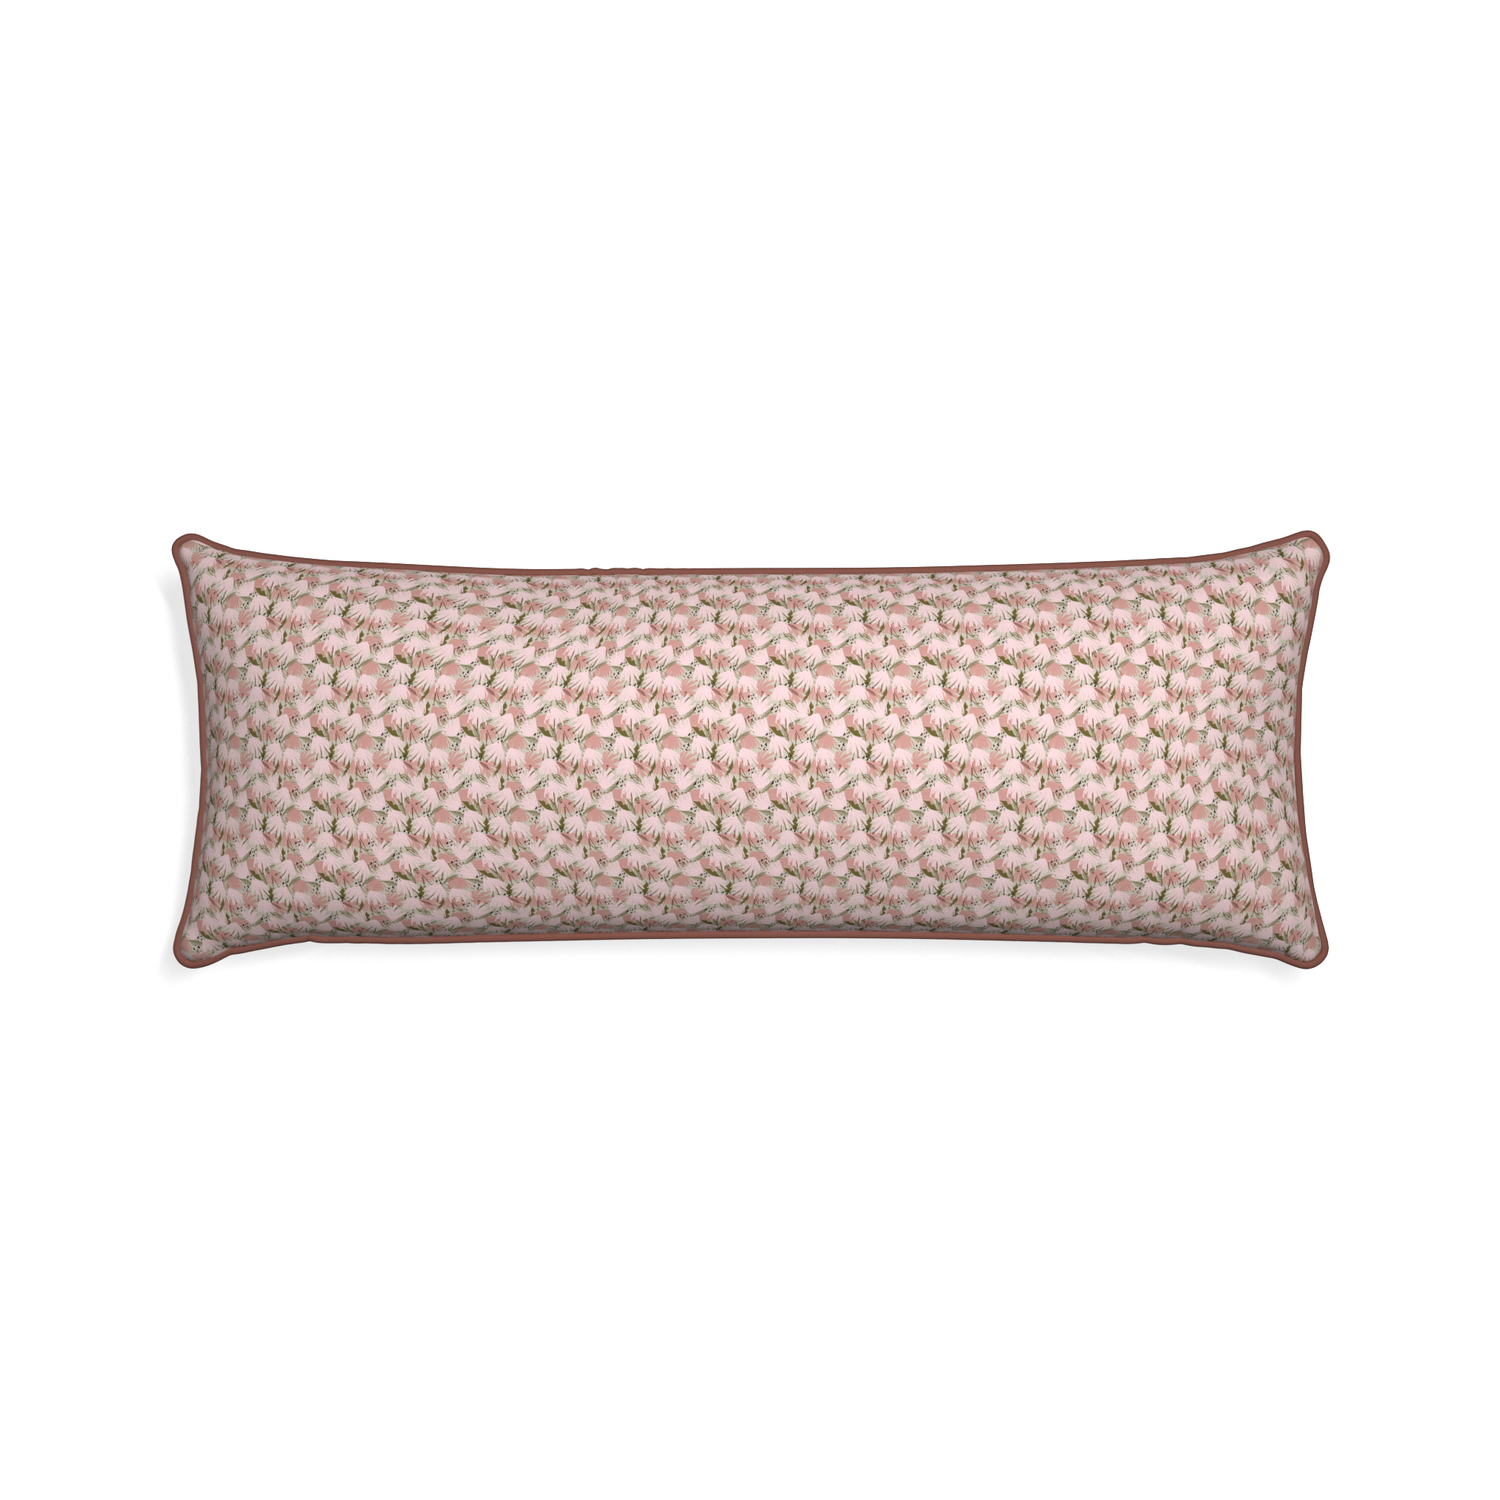 Xl-lumbar eden pink custom pillow with w piping on white background